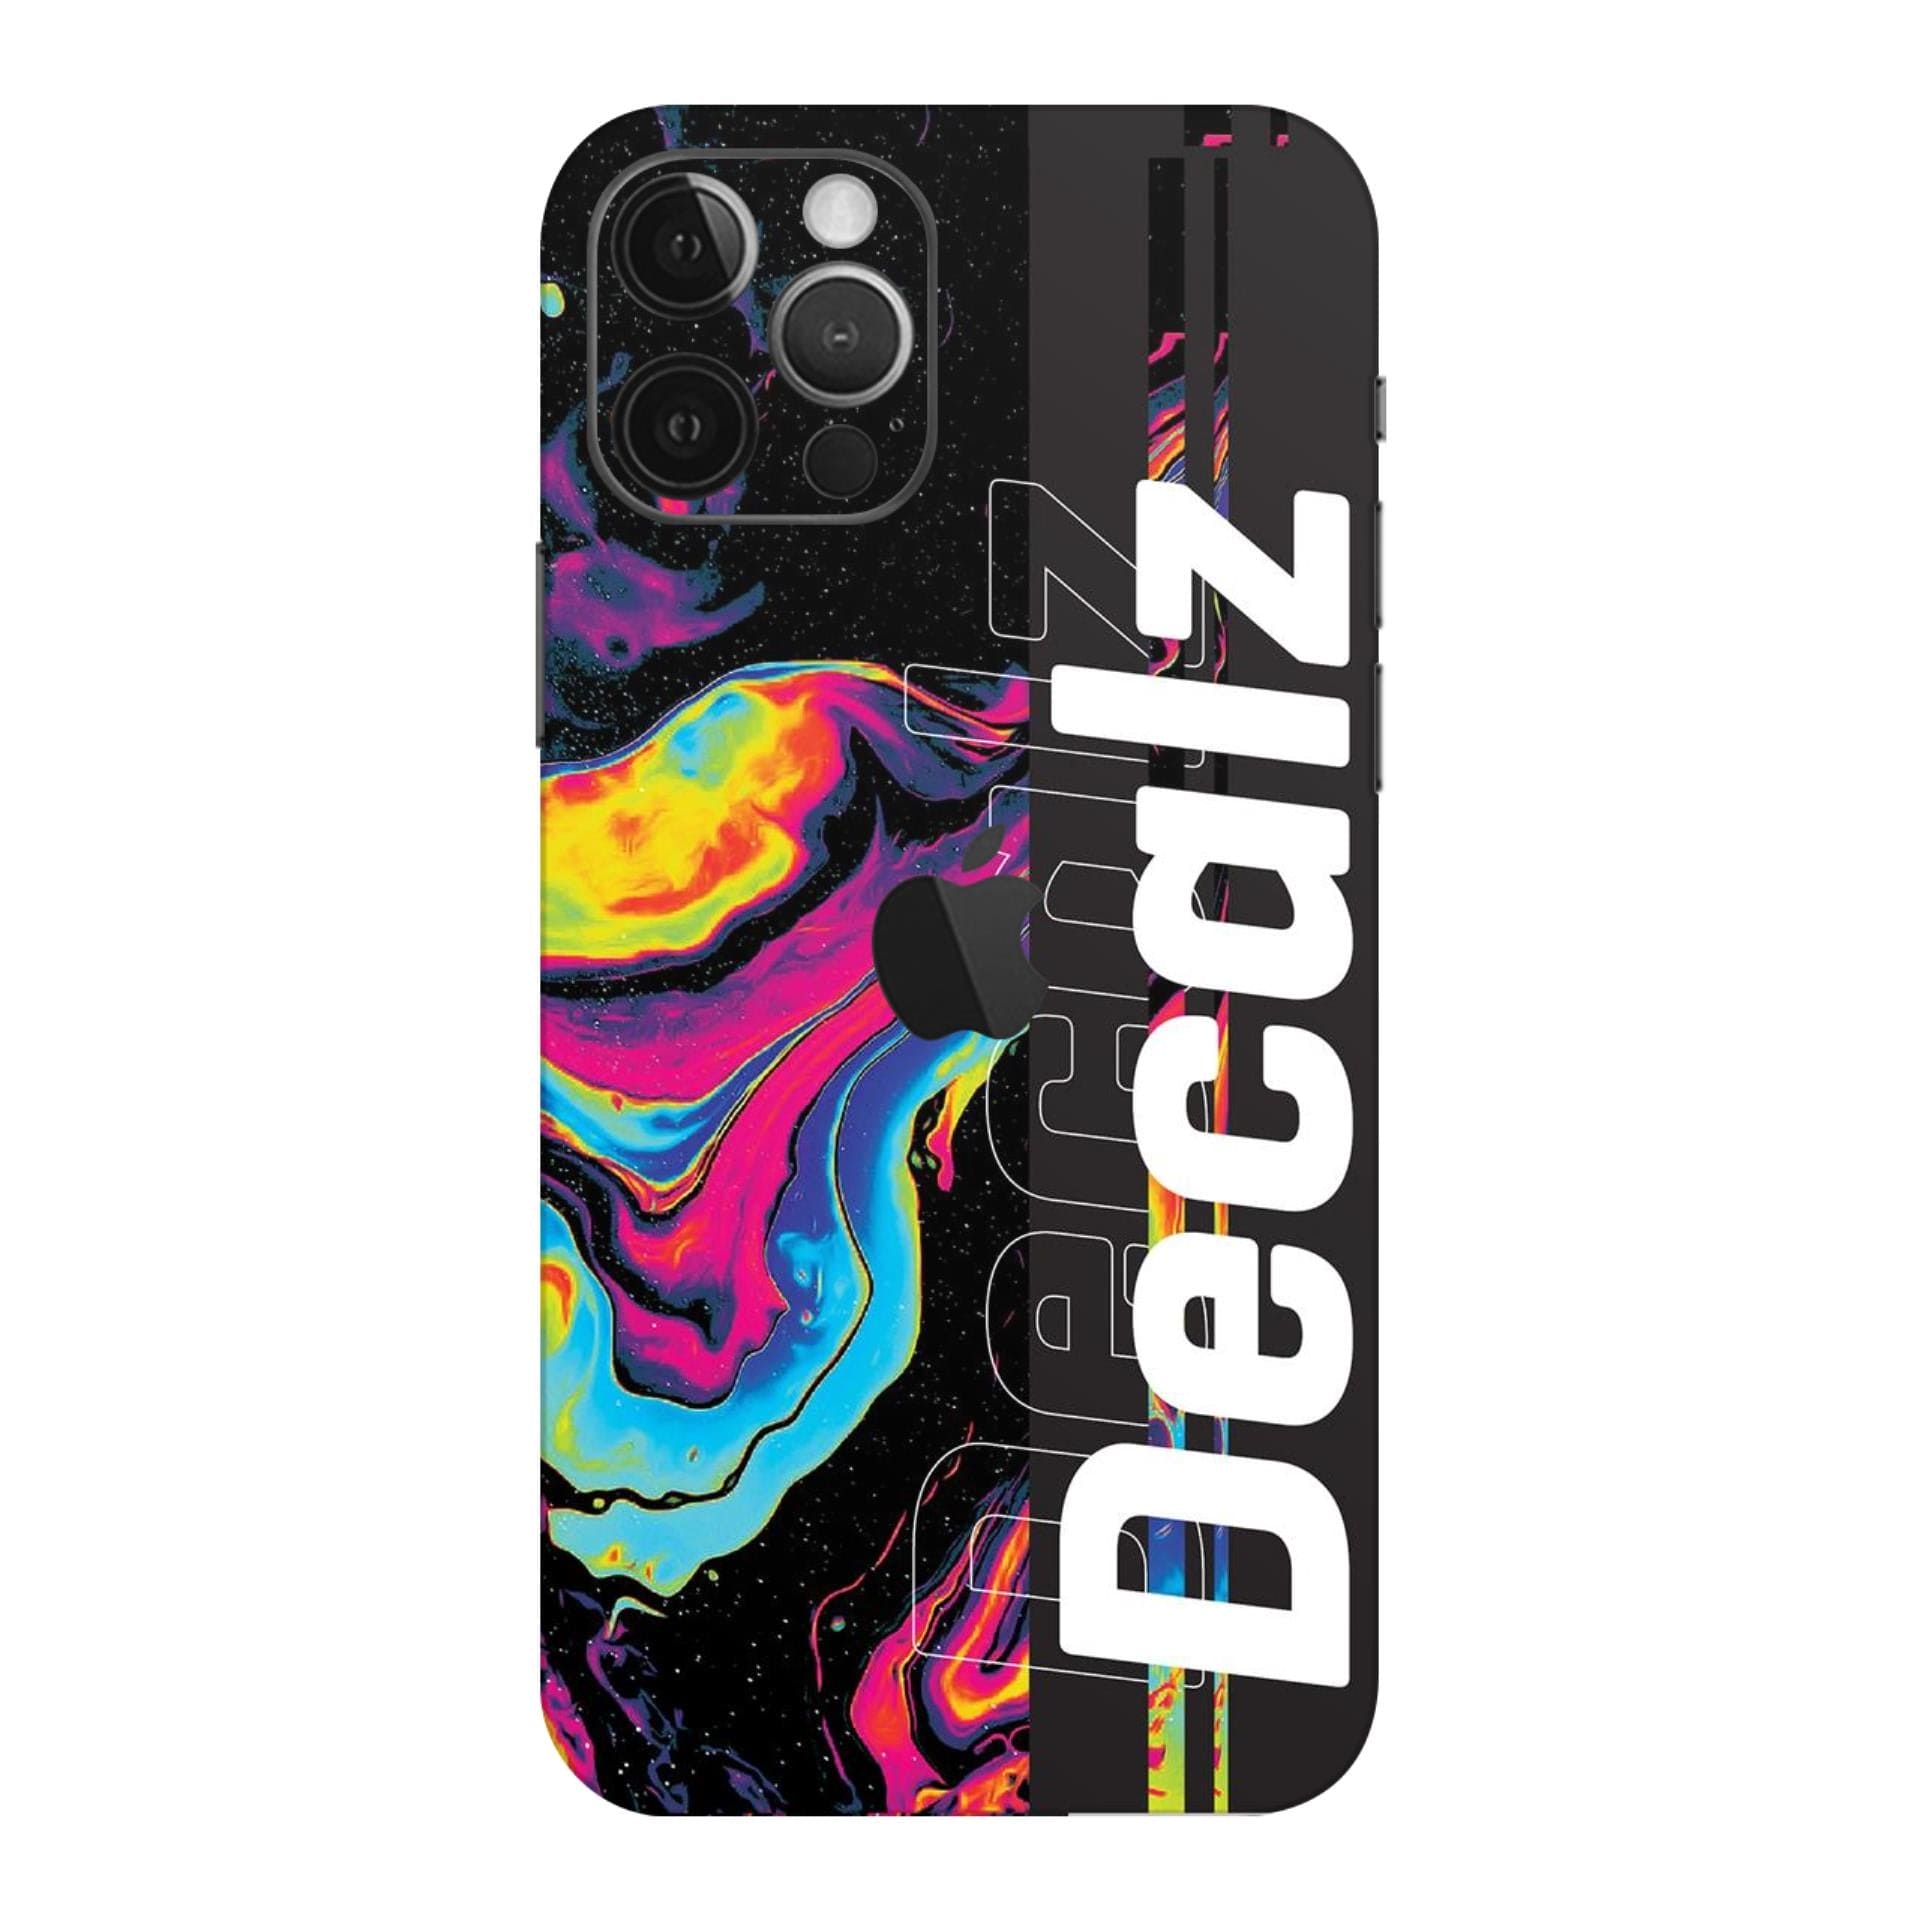 iphone 12 Pro Max Decalz skins